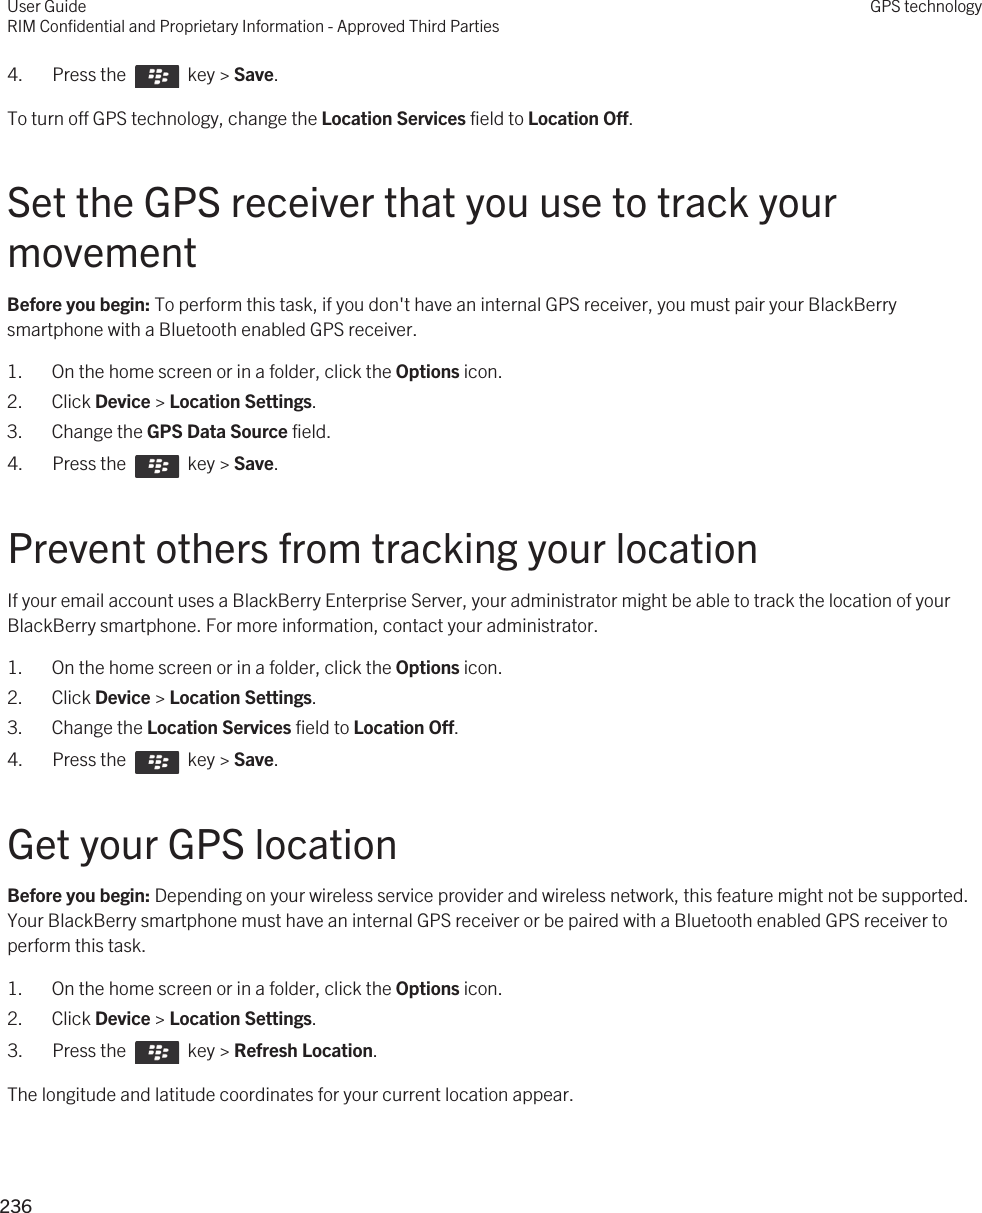 4.  Press the    key &gt; Save. To turn off GPS technology, change the Location Services field to Location Off.Set the GPS receiver that you use to track your movementBefore you begin: To perform this task, if you don&apos;t have an internal GPS receiver, you must pair your BlackBerry smartphone with a Bluetooth enabled GPS receiver.1. On the home screen or in a folder, click the Options icon.2. Click Device &gt; Location Settings.3. Change the GPS Data Source field.4.  Press the    key &gt; Save. Prevent others from tracking your locationIf your email account uses a BlackBerry Enterprise Server, your administrator might be able to track the location of your BlackBerry smartphone. For more information, contact your administrator.1. On the home screen or in a folder, click the Options icon.2. Click Device &gt; Location Settings.3. Change the Location Services field to Location Off.4.  Press the    key &gt; Save. Get your GPS locationBefore you begin: Depending on your wireless service provider and wireless network, this feature might not be supported. Your BlackBerry smartphone must have an internal GPS receiver or be paired with a Bluetooth enabled GPS receiver to perform this task.1. On the home screen or in a folder, click the Options icon.2. Click Device &gt; Location Settings.3.  Press the    key &gt; Refresh Location. The longitude and latitude coordinates for your current location appear.User GuideRIM Confidential and Proprietary Information - Approved Third PartiesGPS technology236 